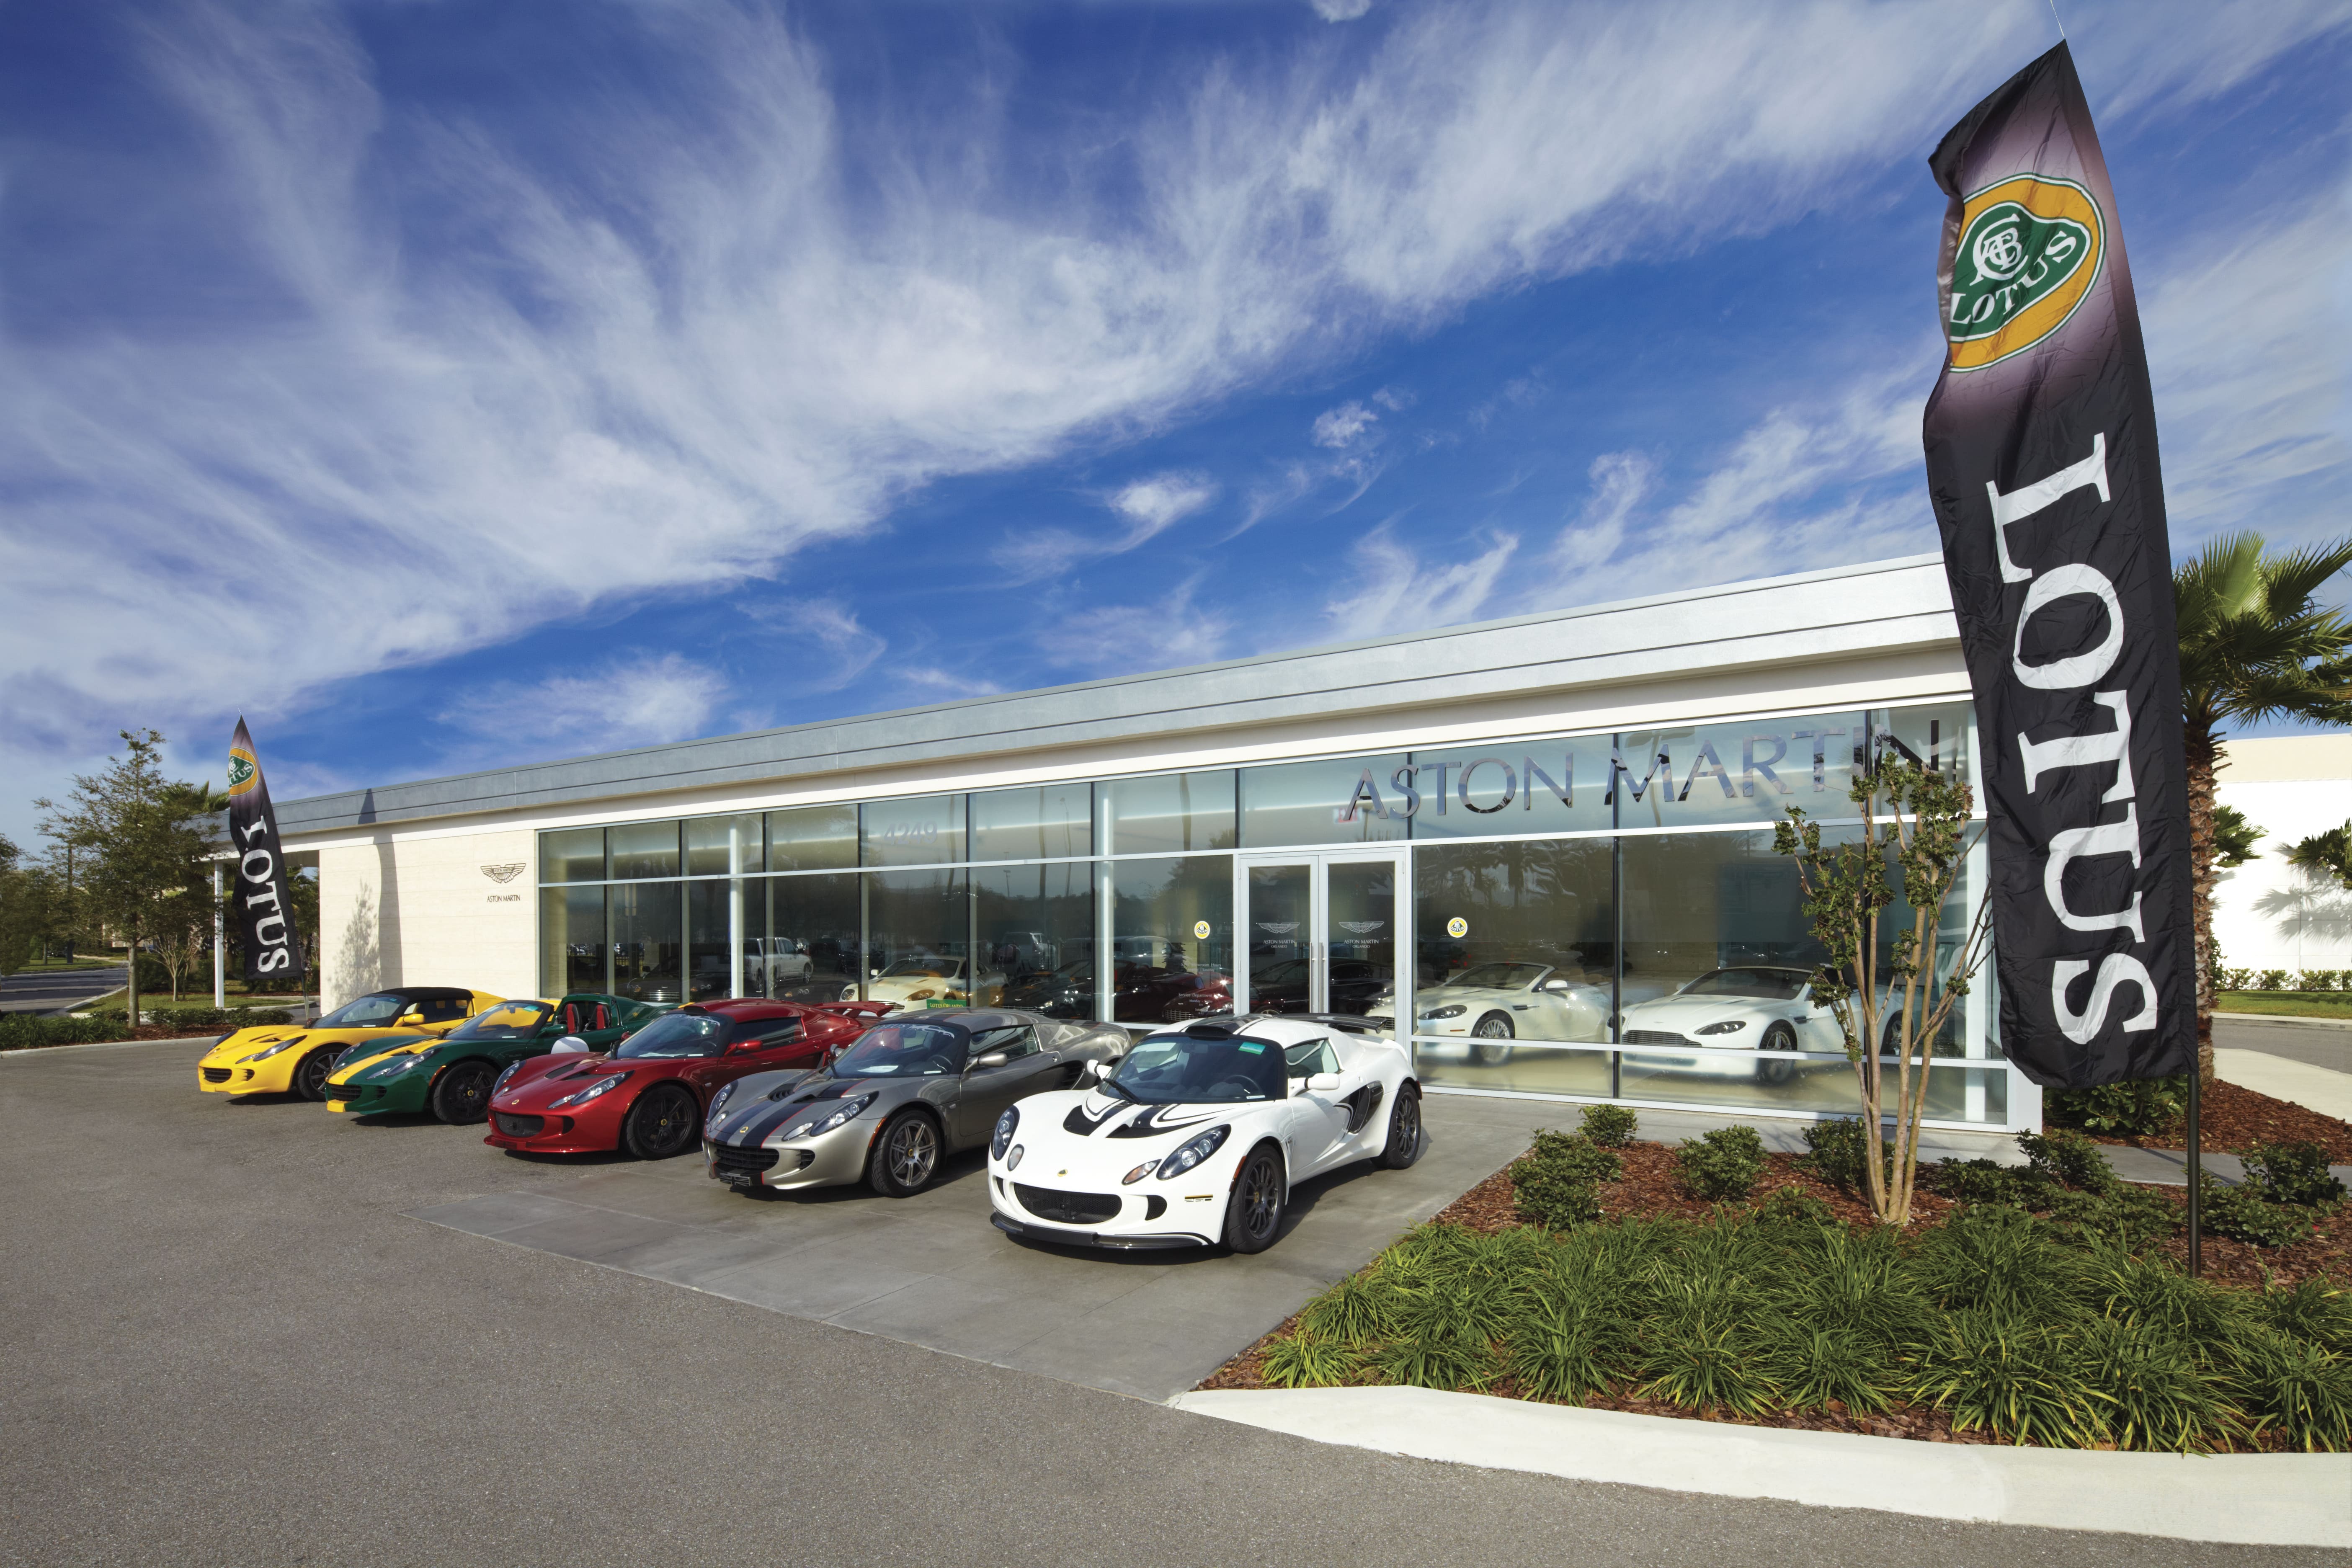 Lotus of Orlando in Orlando, Florida, is proud to offer a wide selection of new Lotus vehicles for sale or lease. Our knowledgeable and friendly staff will be happy to assist you in finding the perfect car for your needs.